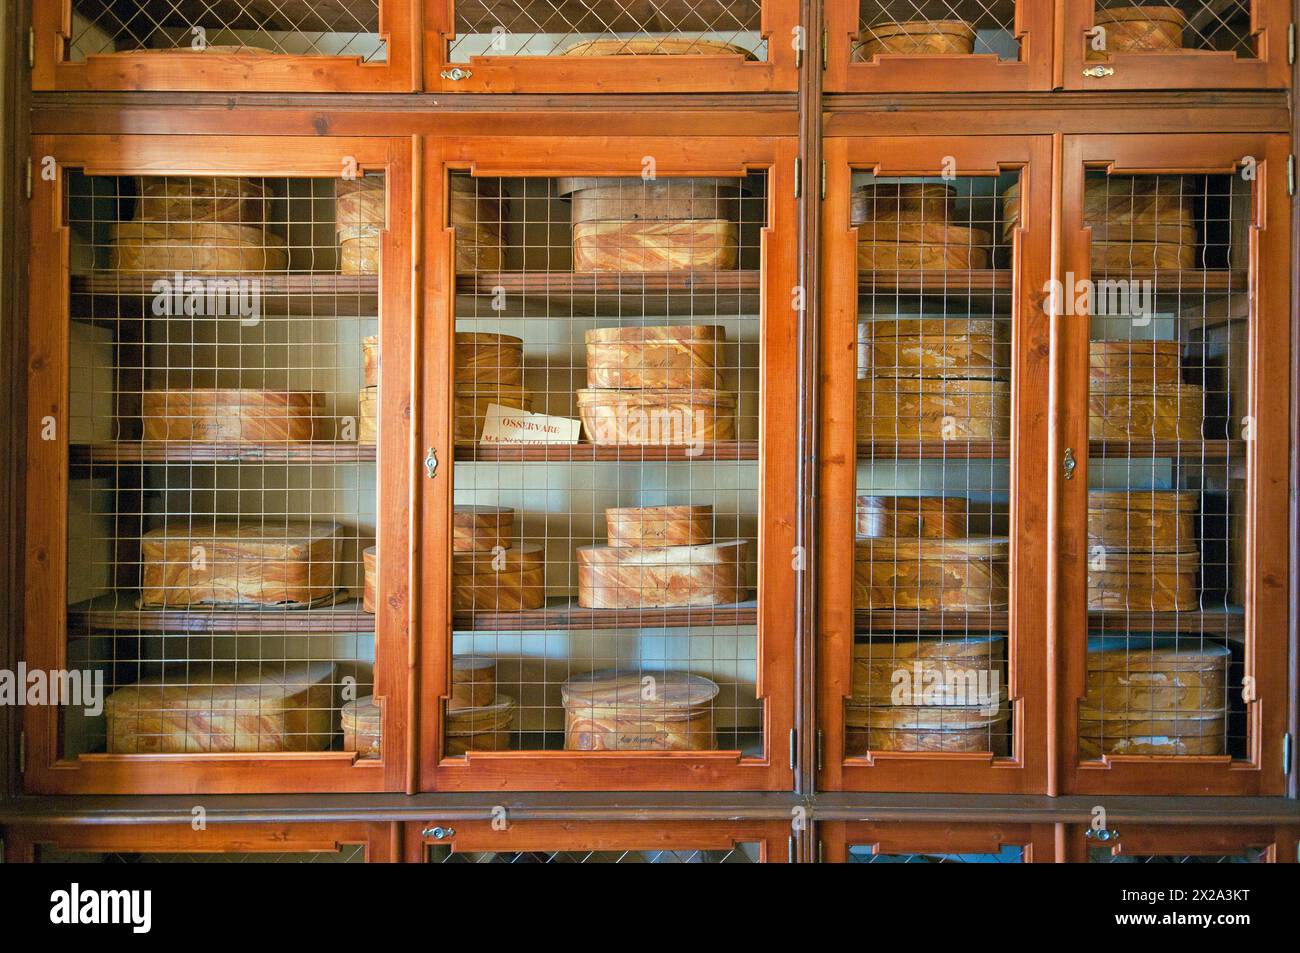 Showcase with wooden boxes for medicinal herbs in the ancient pharmacy (18th century) of the Trisulti Charterhouse, Collepardo, Lazio, Italy Stock Photo